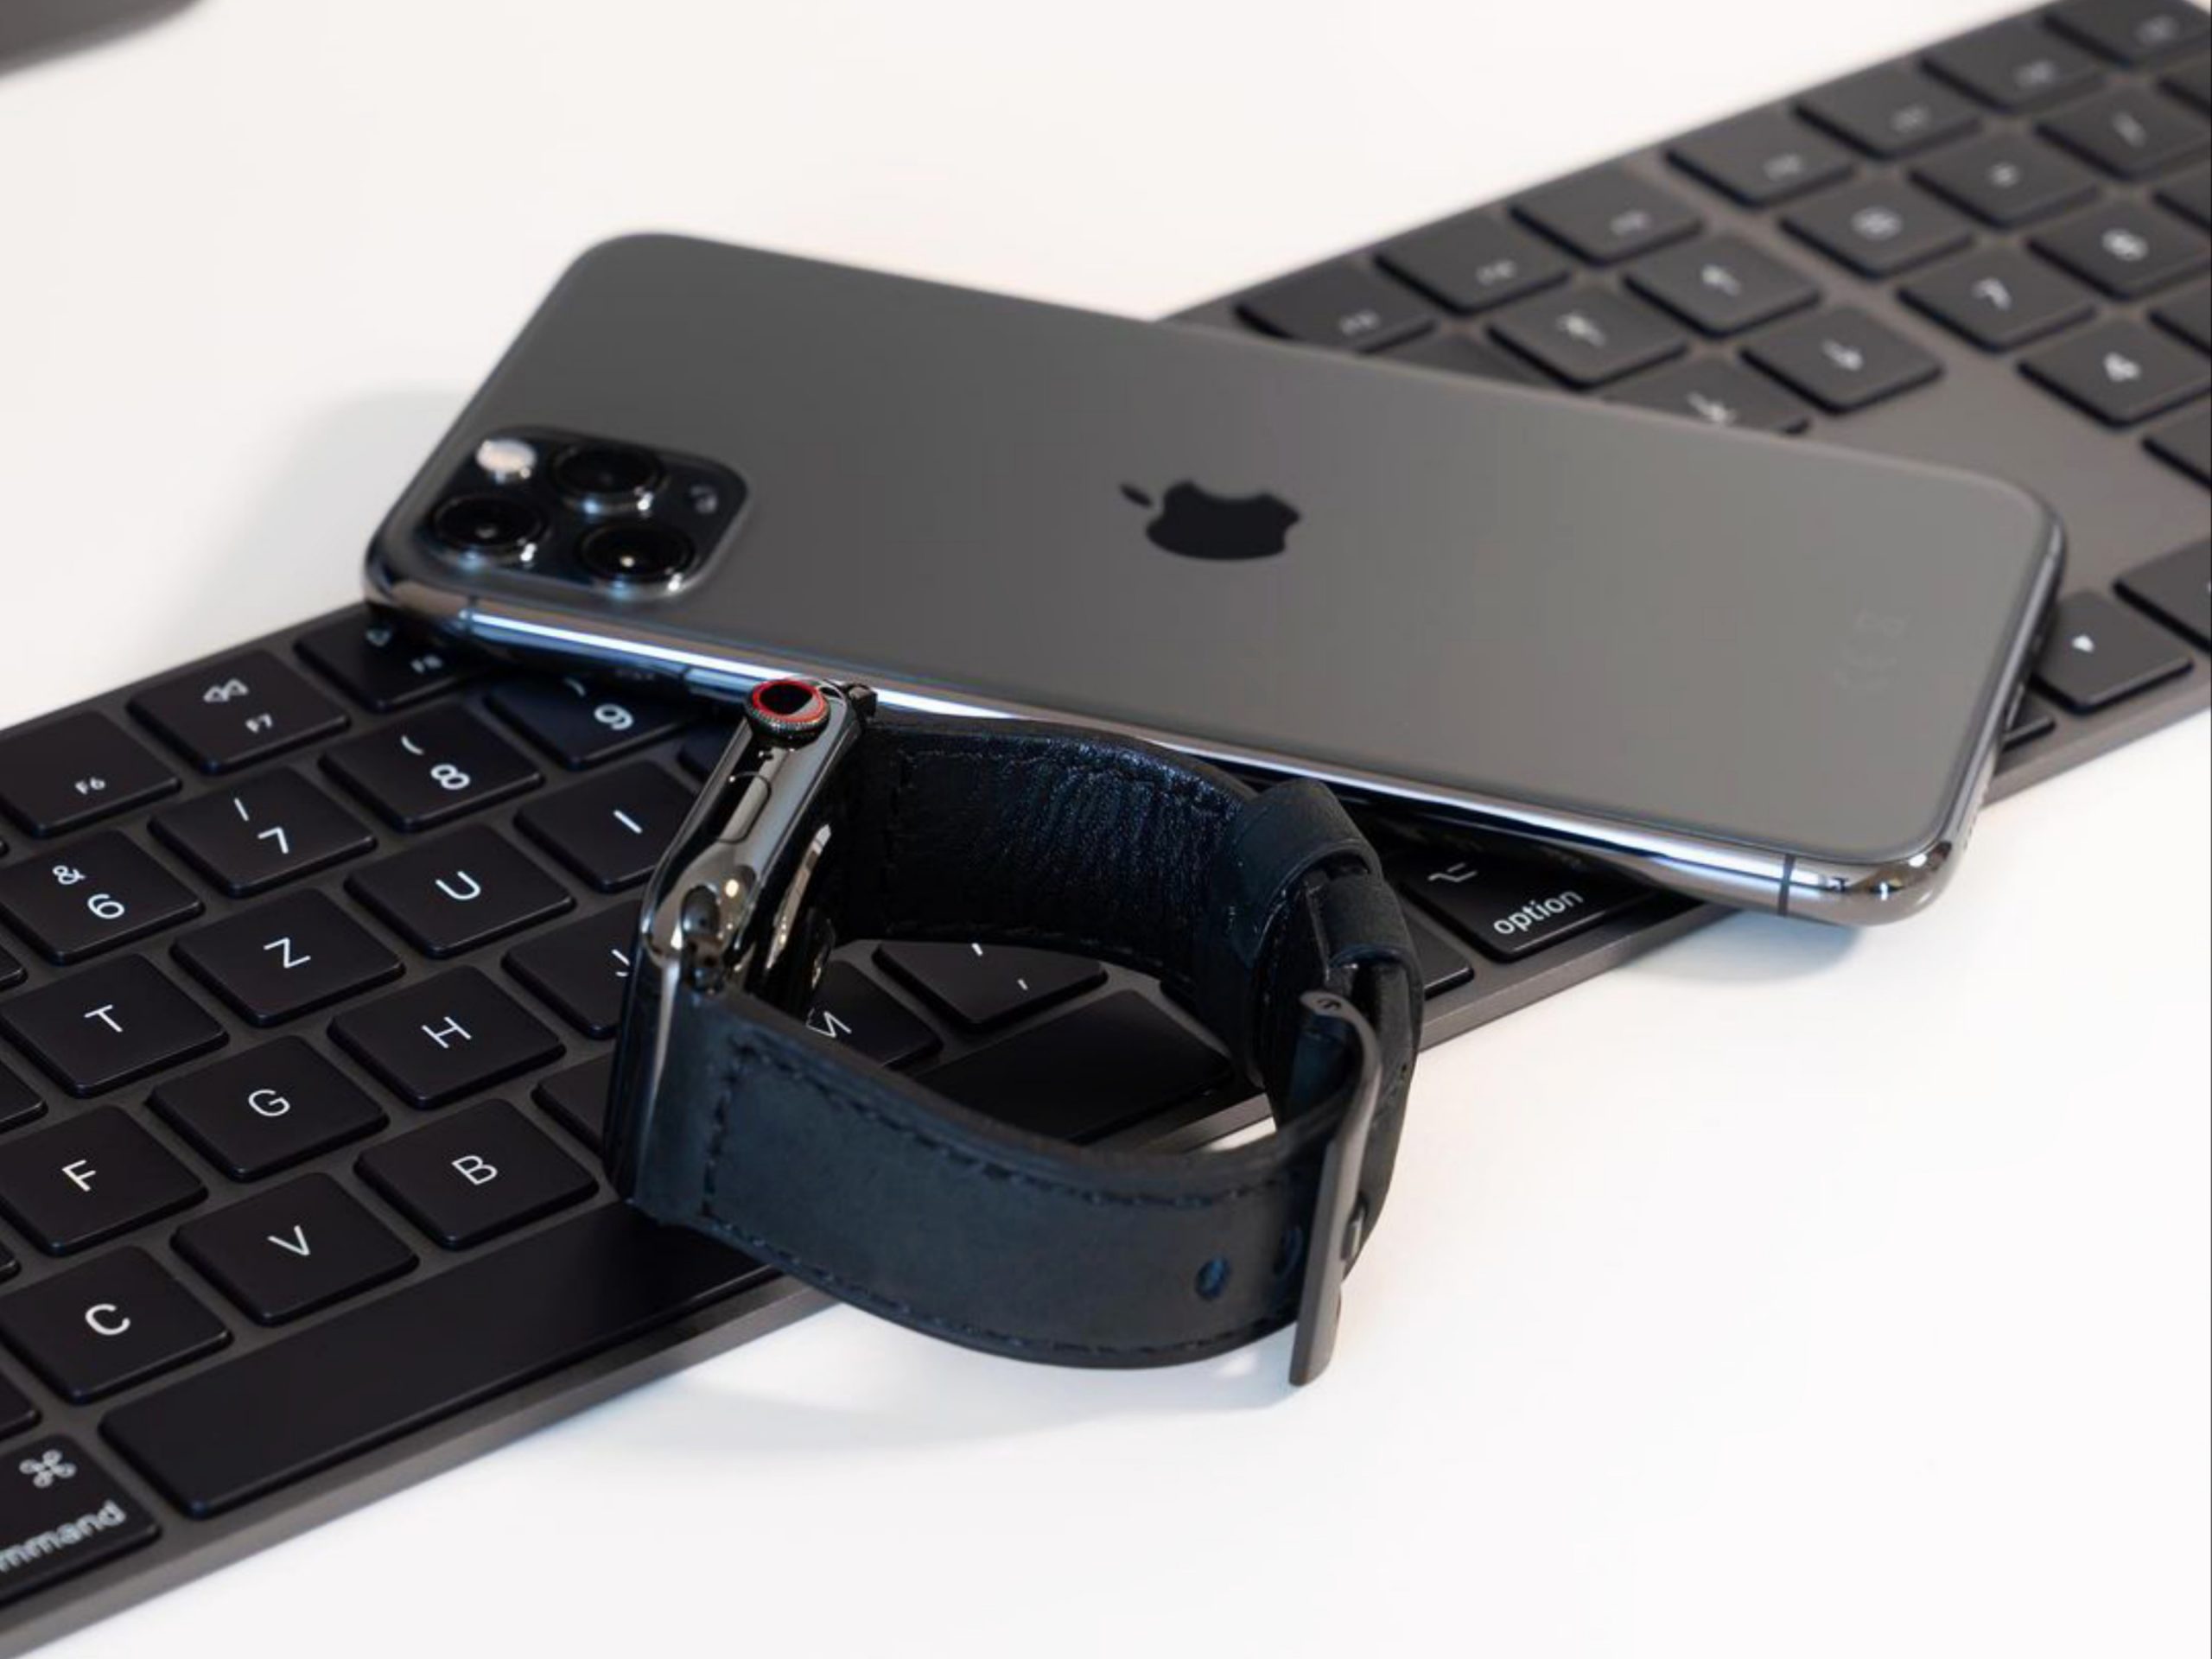 keyboard, iphone and watch